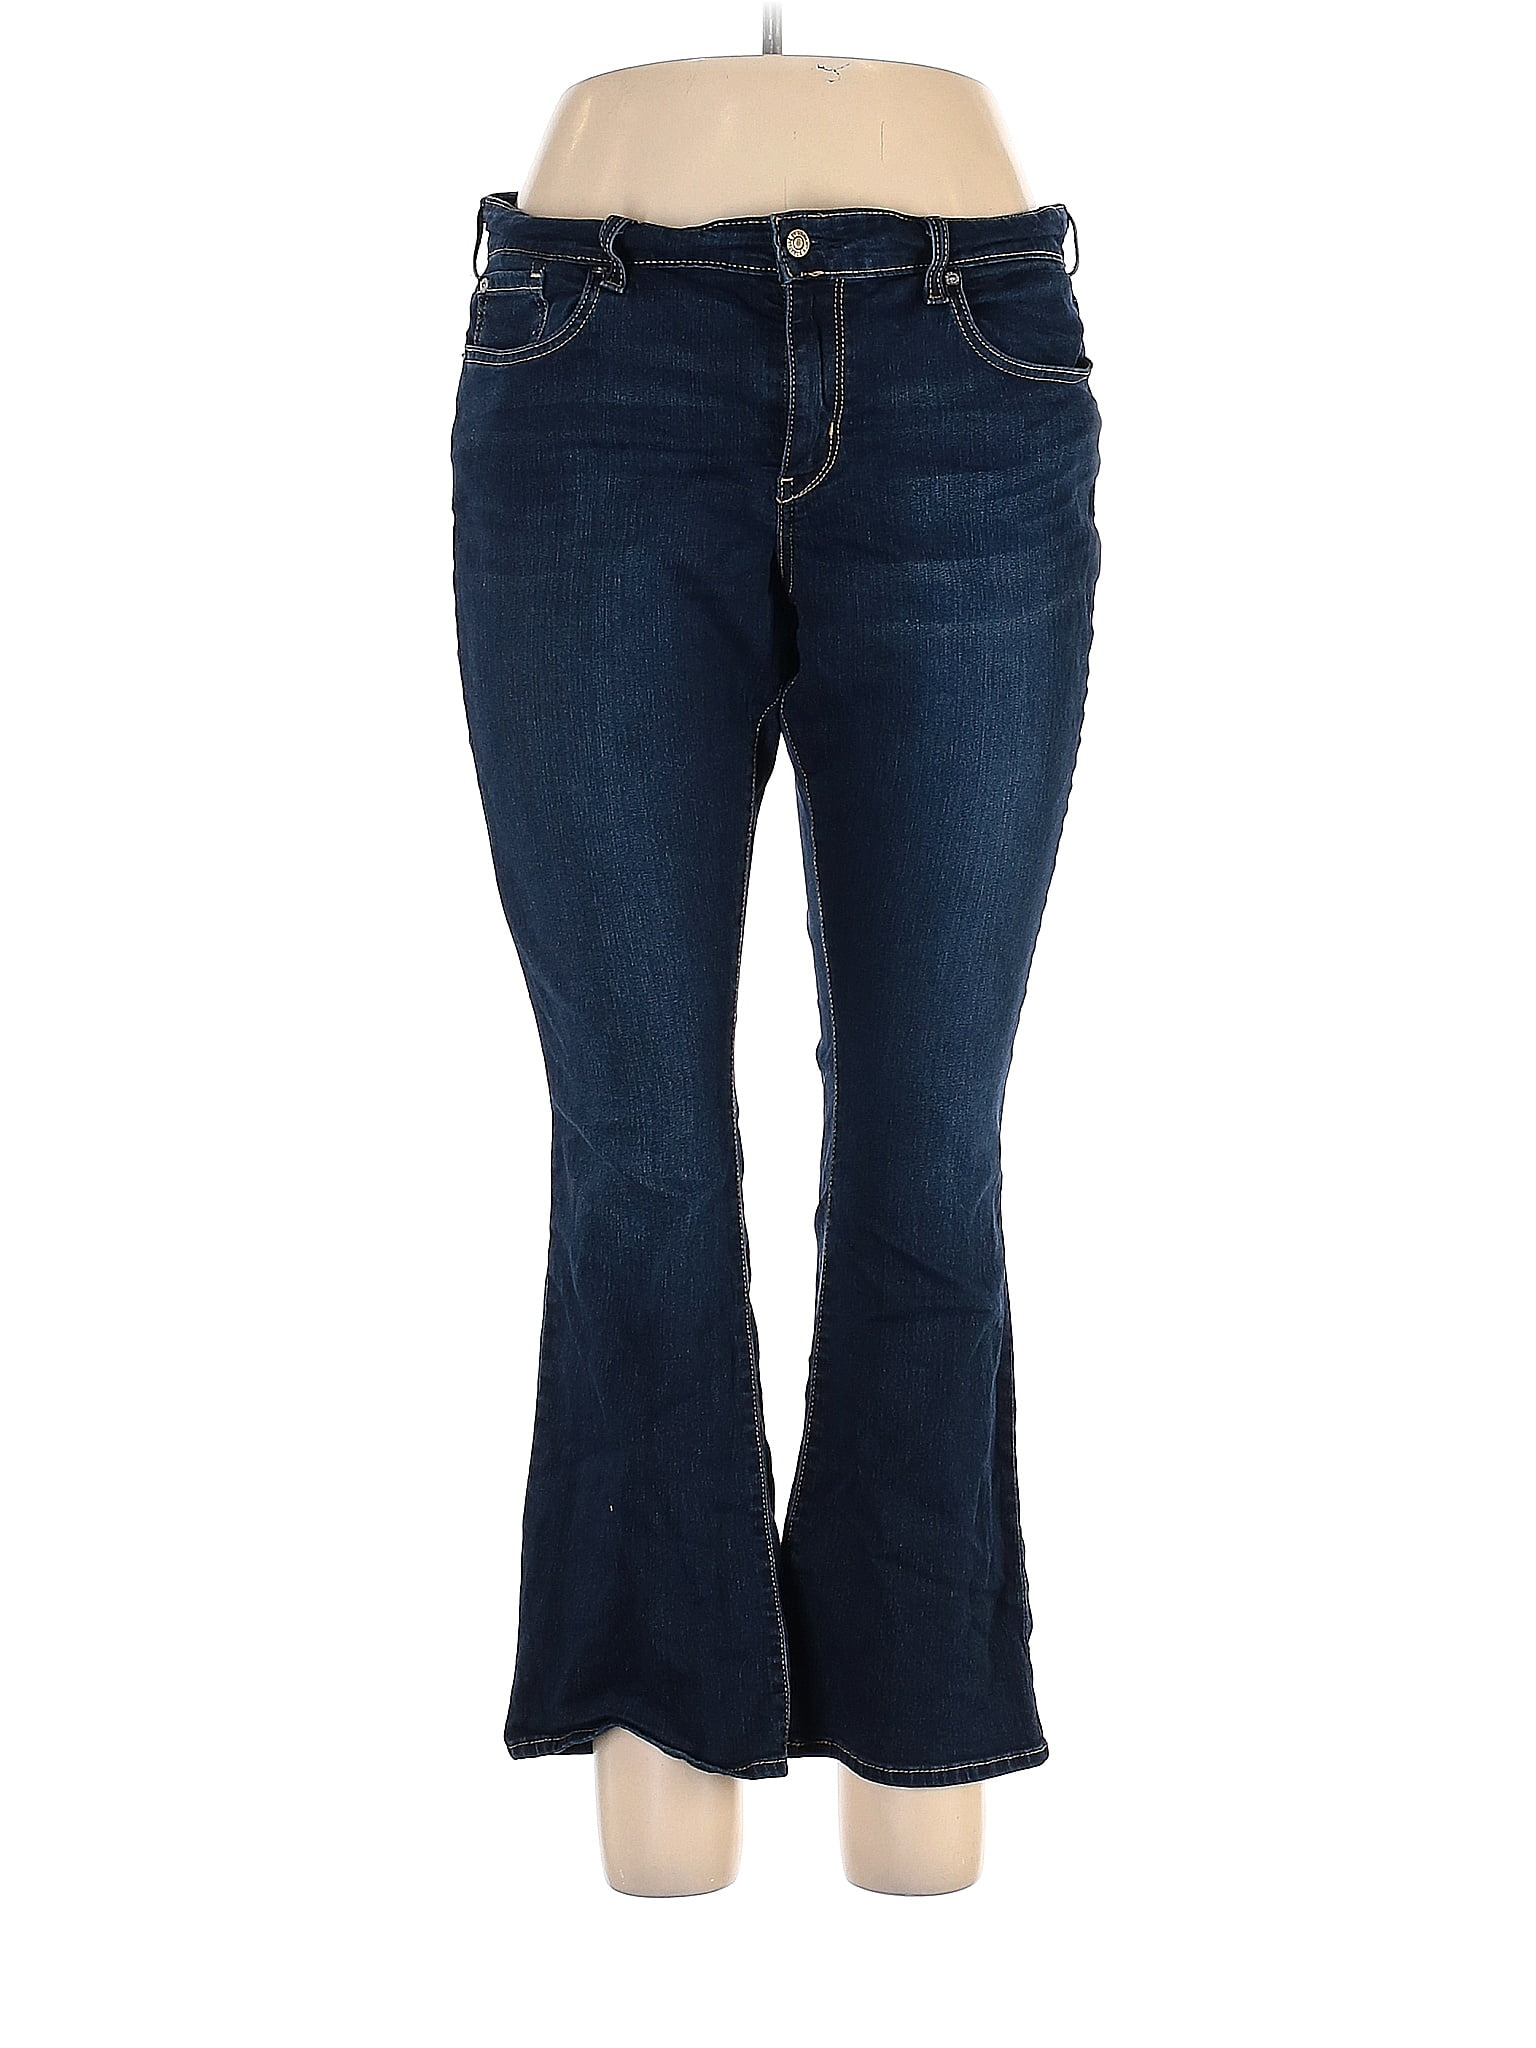 Faded Glory Solid Blue Jeans Size 18 (Plus) - 16% off